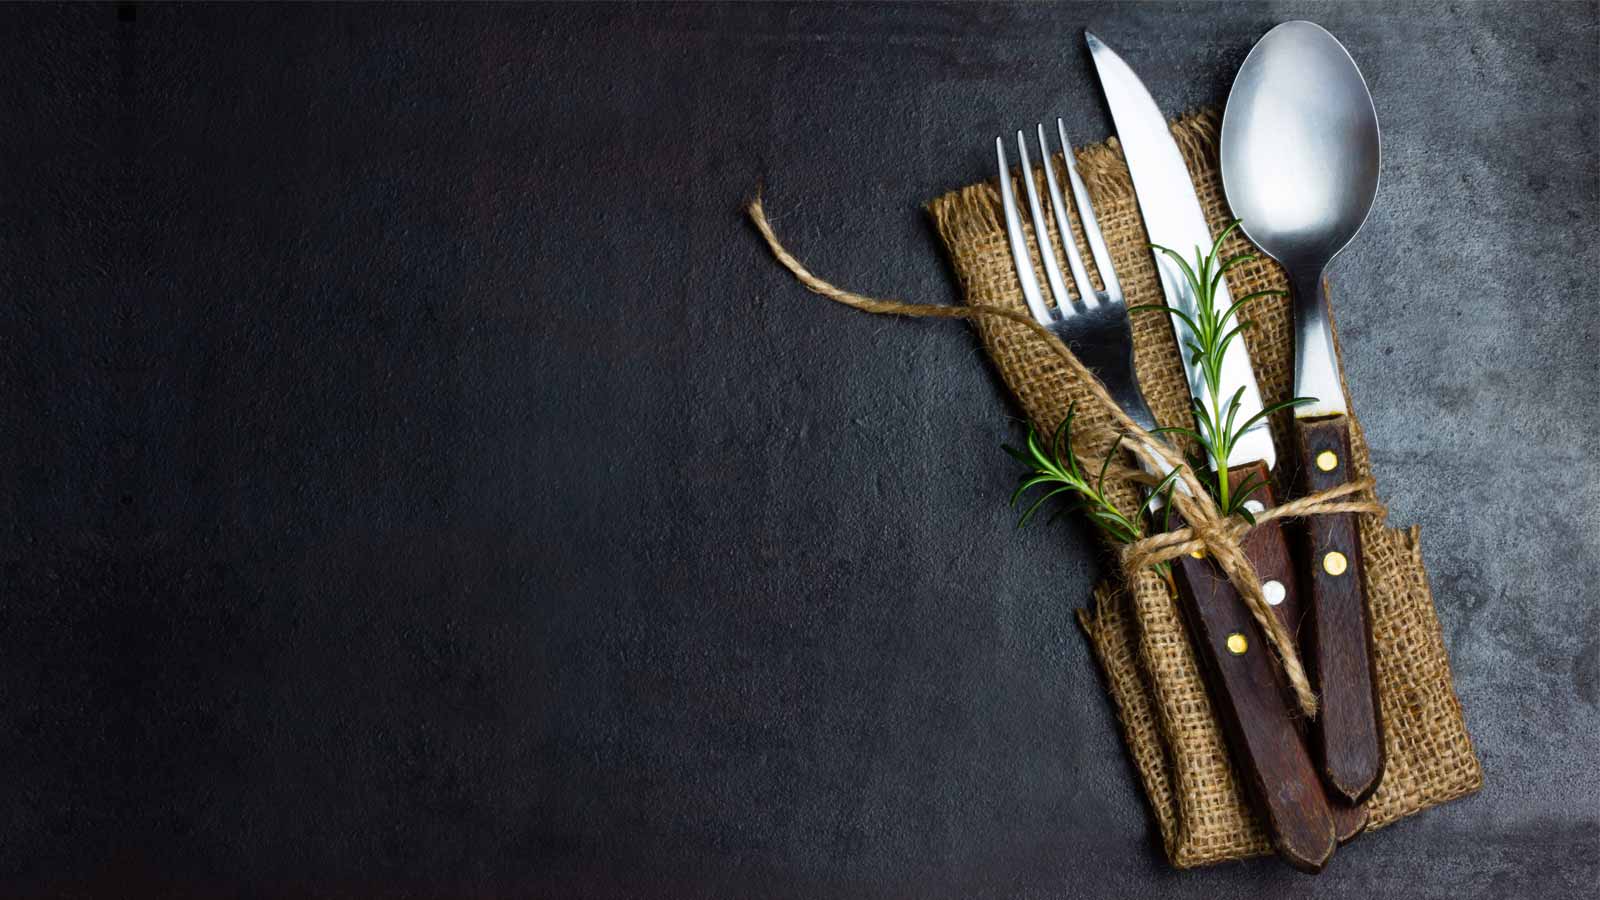 Food festival cutlery wrapped in herbs and twine that match the expensive kitchen look